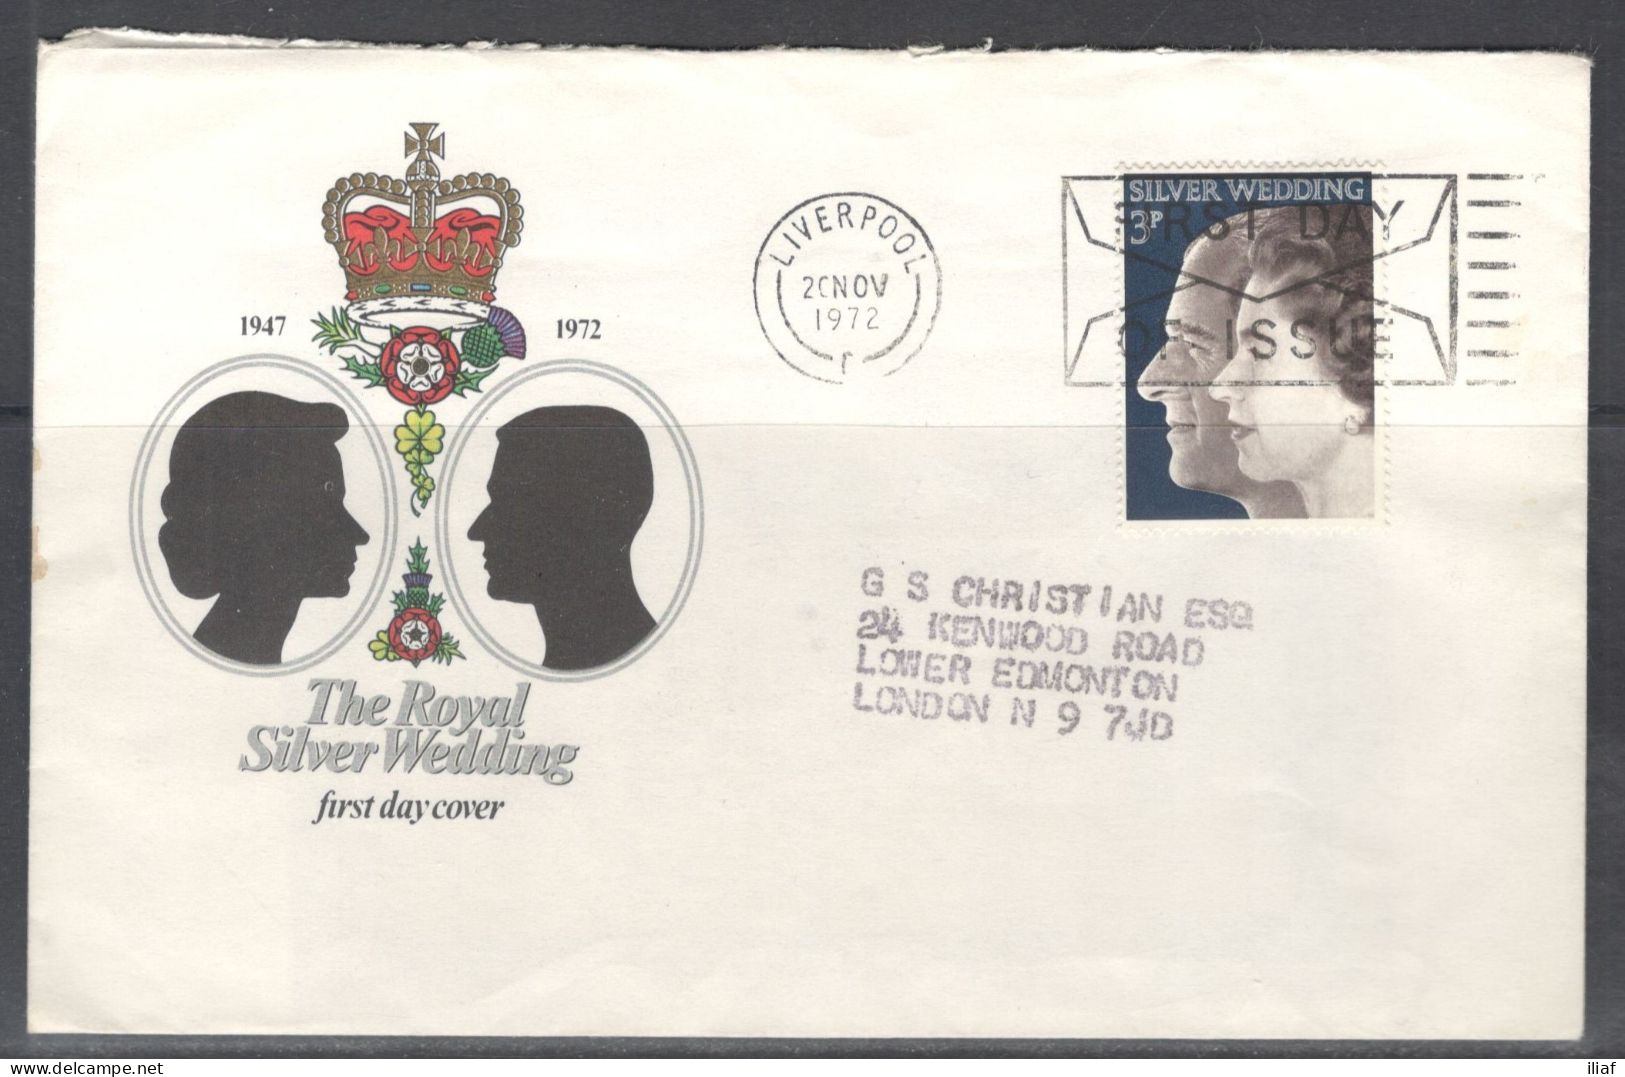 United Kingdom Of Great Britain. FDC Sc. 683. 25th Wedding Anniversary Of Queen Elizabeth II And Prince Philip  FDC Canc - 1971-1980 Decimal Issues